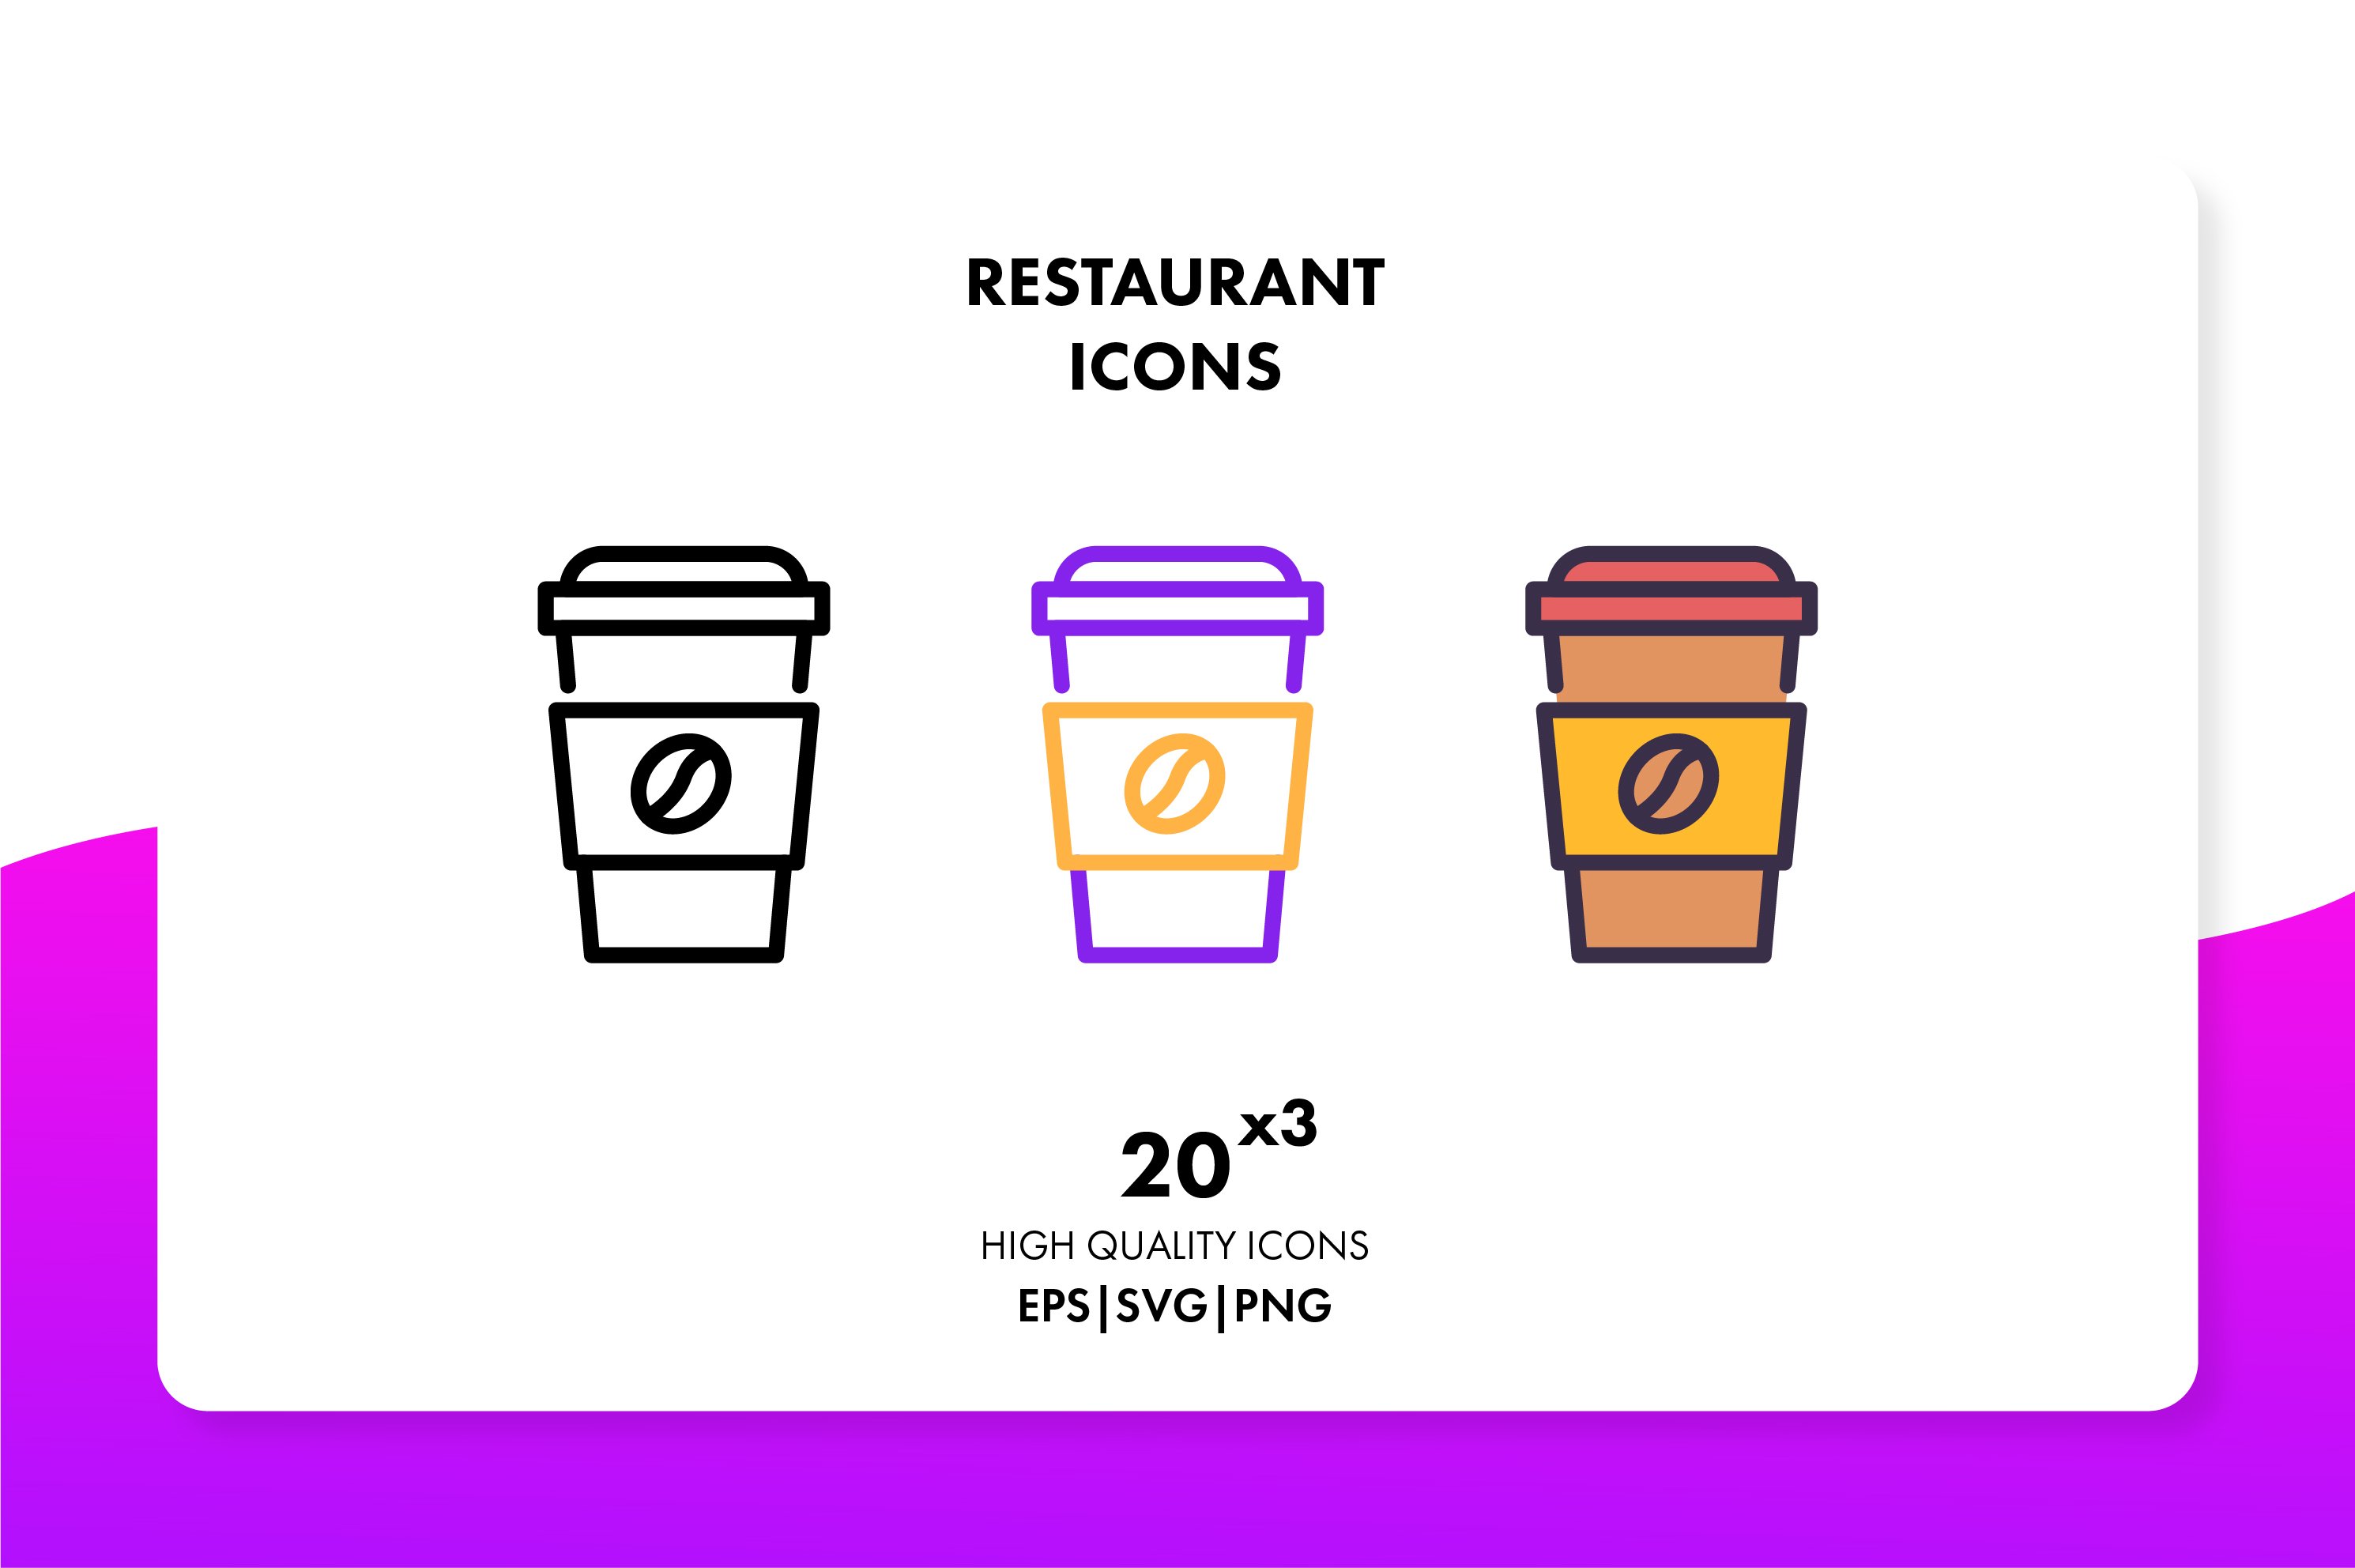 Restaurant Icons cover image.